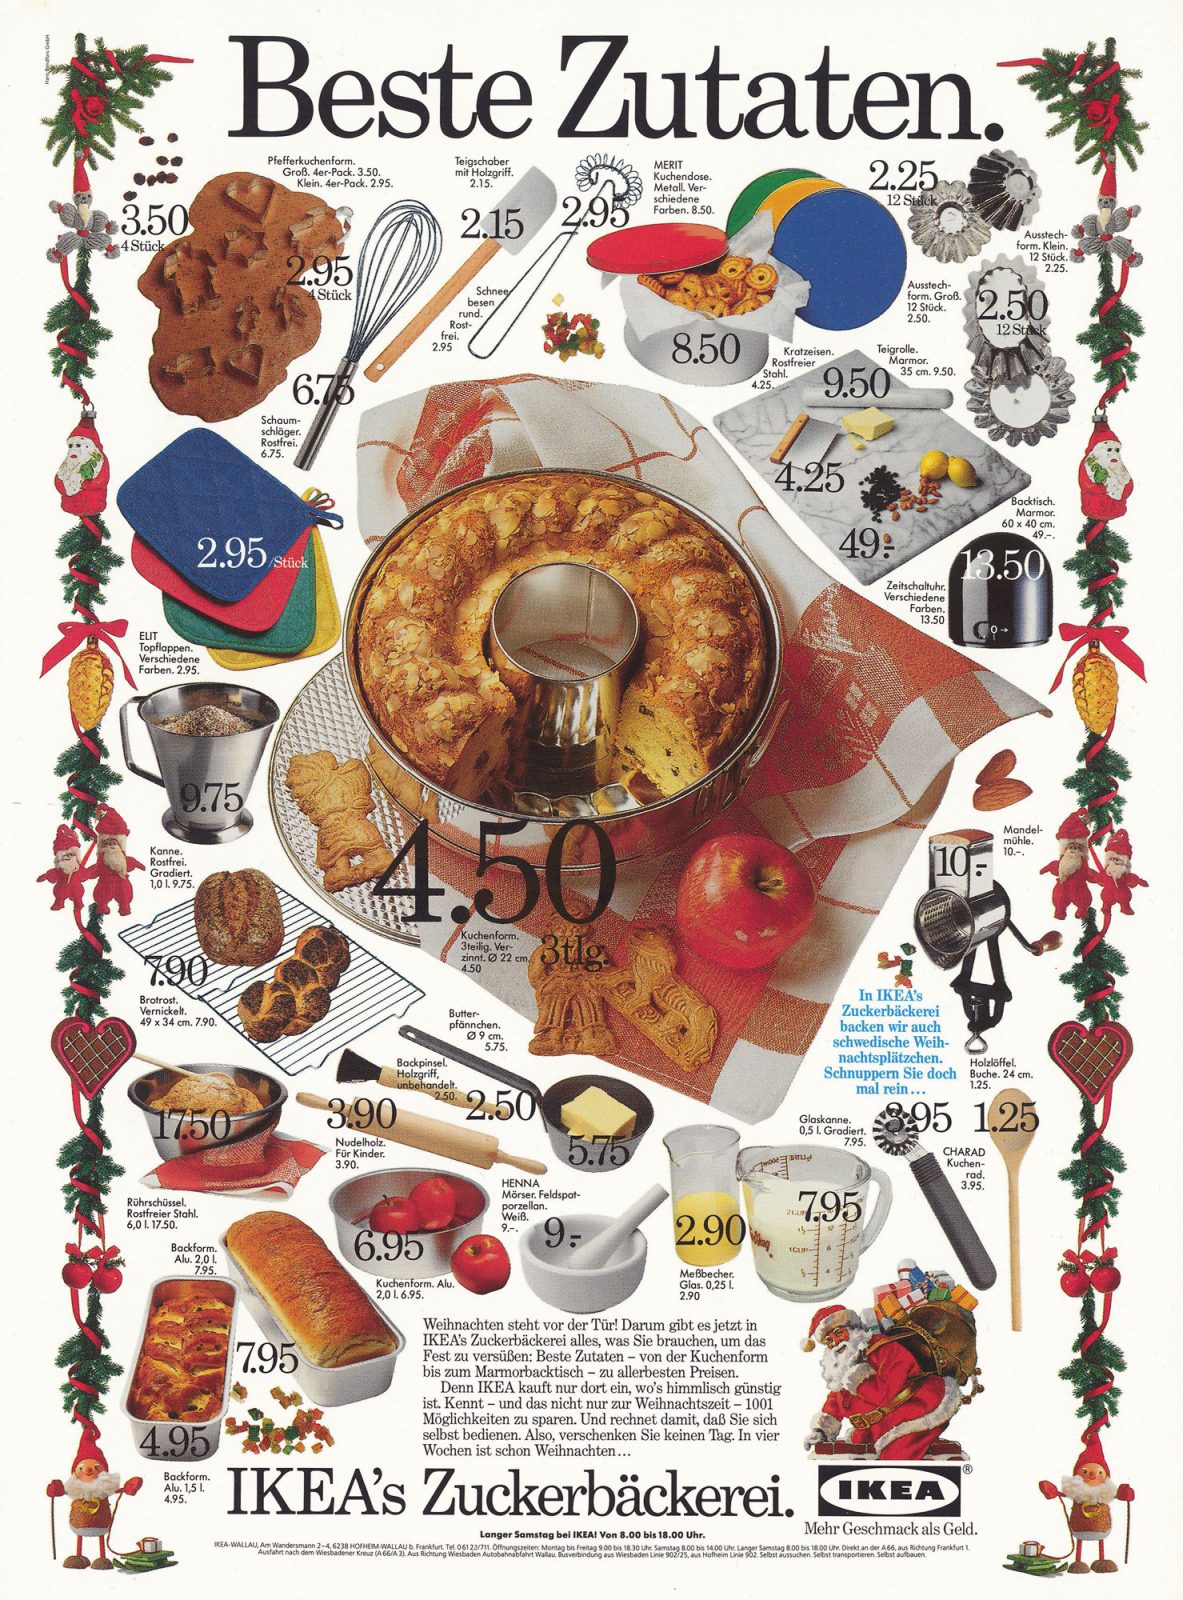 Ad with a myriad of photos depicting kitchen utensils and Christmas foods, all price marked.